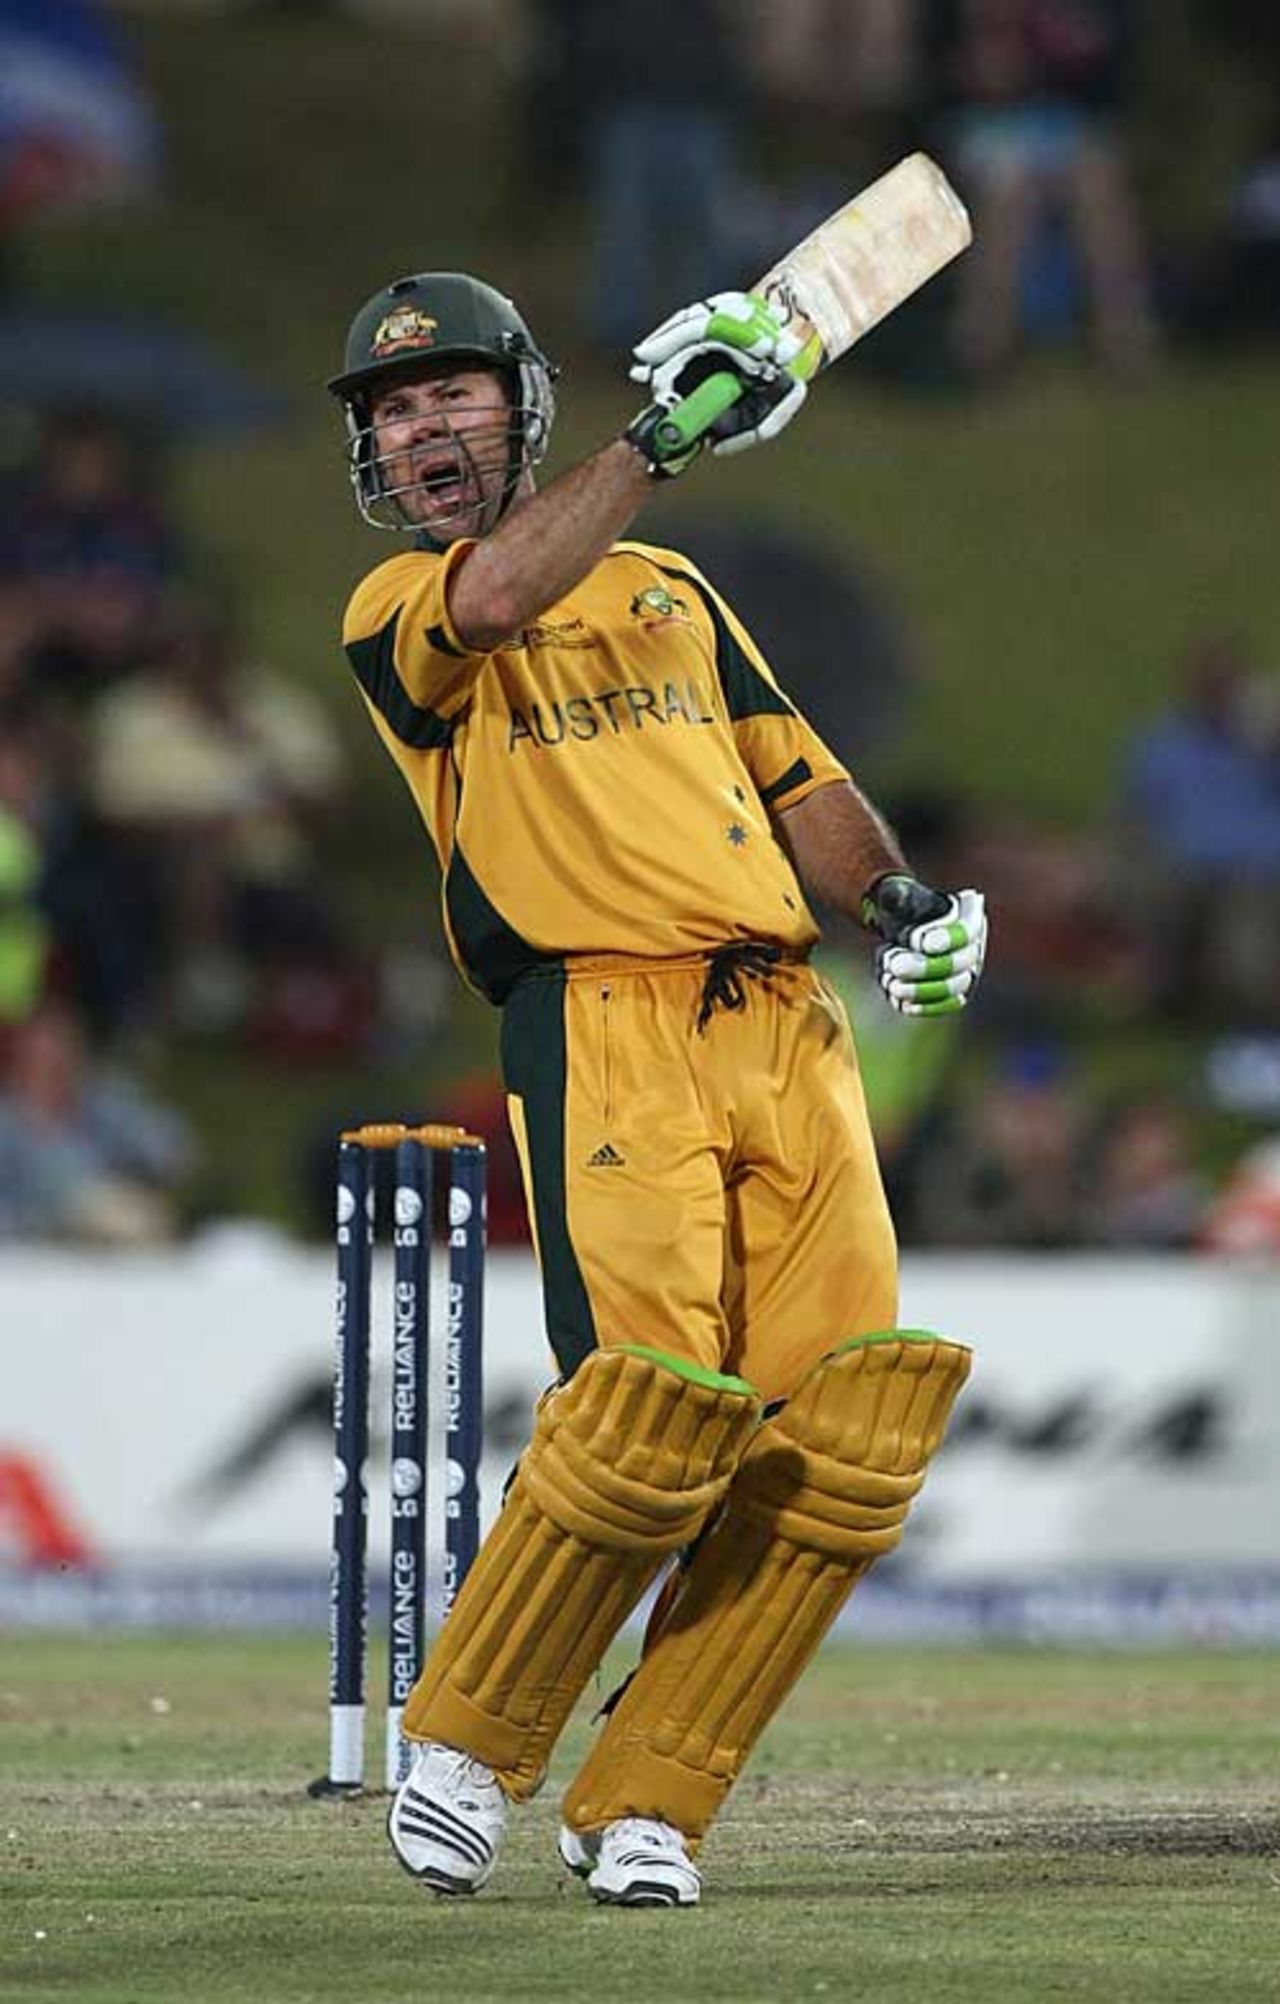 Ricky Ponting shows his emotion after reaching three figures, Australia v England, 1st semi-final, Champions Trophy, Centurion Park, October 2, 2009